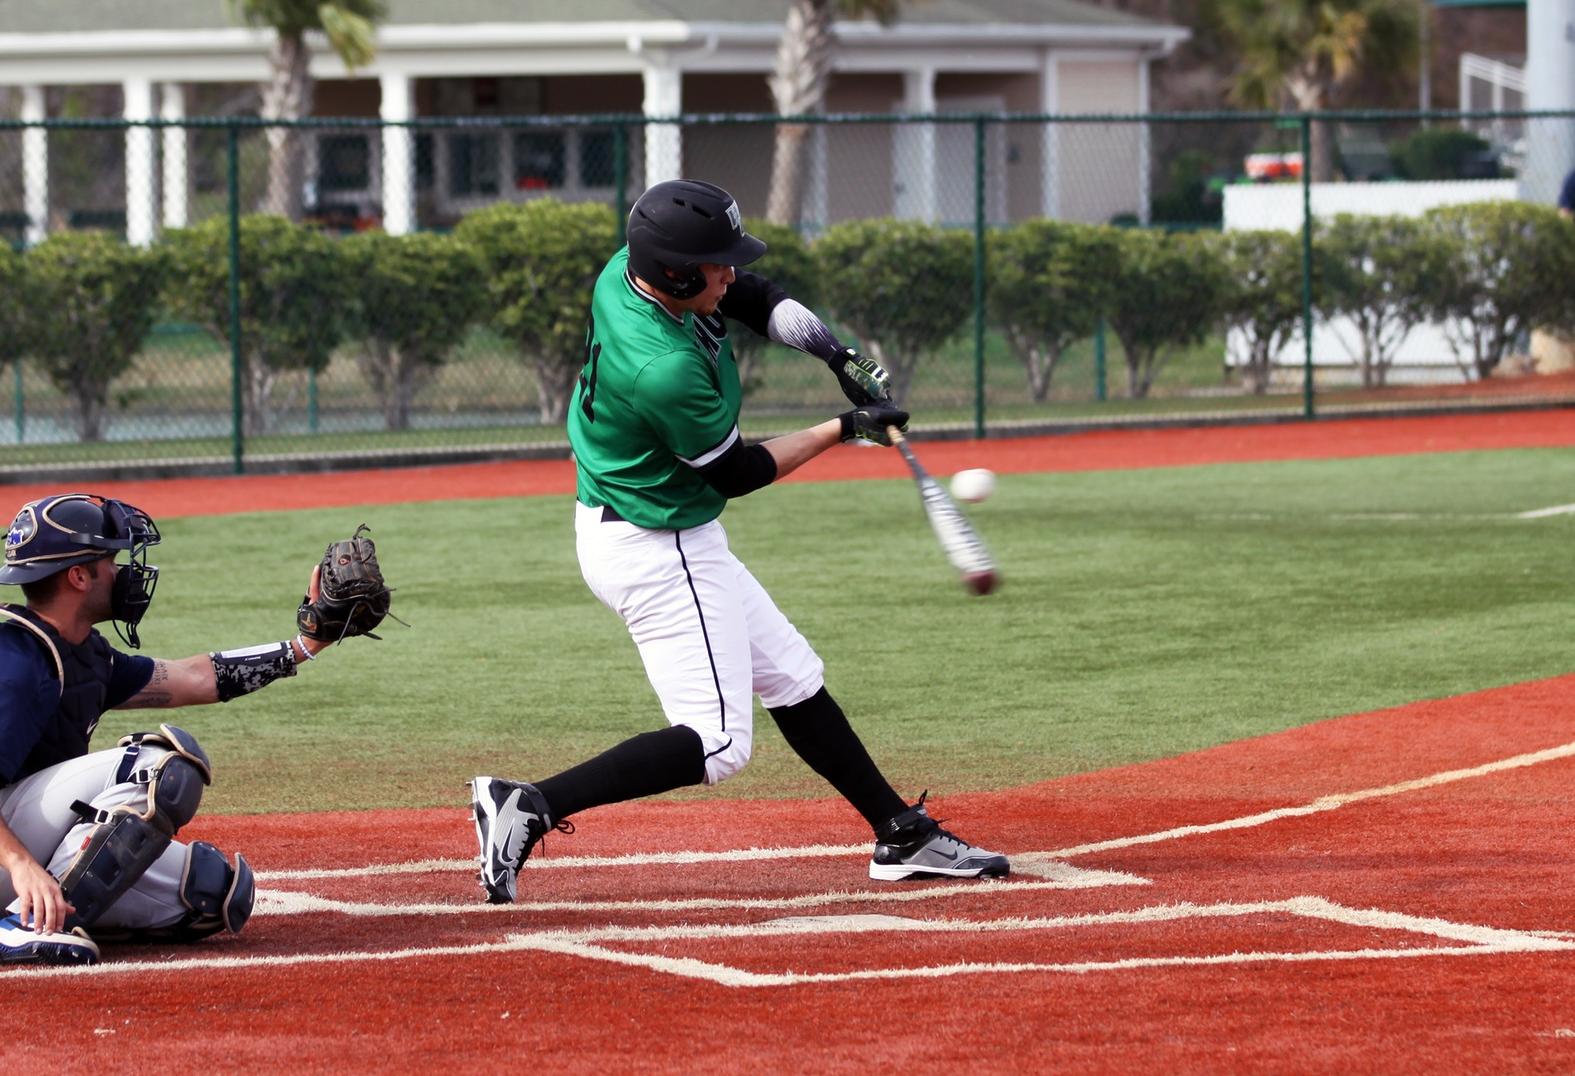 Copyright 2019; Wilmington University. All rights reserved. Photo by Dan Lauletta. February 24, 2019 vs. Molloy at Myrtle Beach, S.C. Photo of Quintin Ivy who went 4-for-6 with three RBI in game one against Caldwell and 3-for-5 with a solo homerun and three RBI in game two against Caldwell on April 27, 2019.